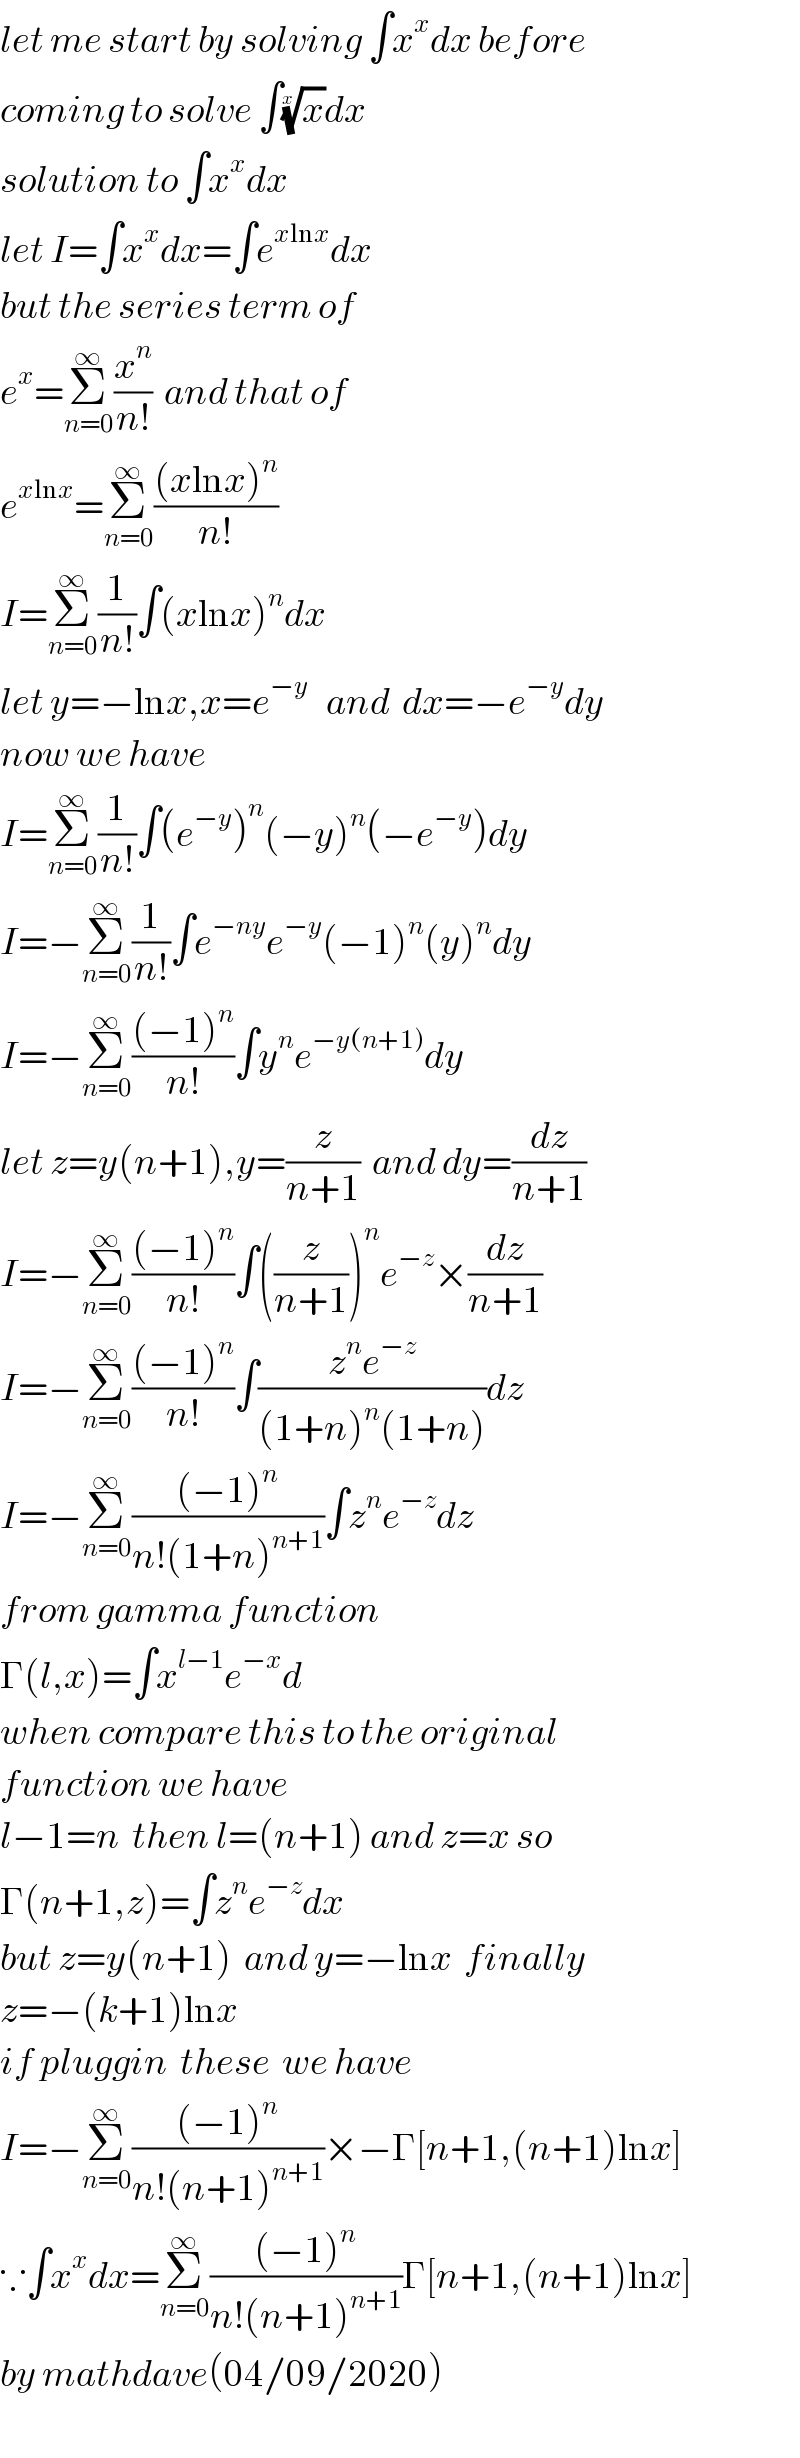 let me start by solving ∫x^x dx before  coming to solve ∫(x)^(1/x) dx  solution to ∫x^x dx  let I=∫x^x dx=∫e^(xlnx) dx  but the series term of  e^x =Σ_(n=0) ^∞ (x^n /(n!))  and that of   e^(xlnx) =Σ_(n=0) ^∞ (((xlnx)^n )/(n!))  I=Σ_(n=0) ^∞ (1/(n!))∫(xlnx)^n dx  let y=−lnx,x=e^(−y)    and  dx=−e^(−y) dy  now we have  I=Σ_(n=0) ^∞ (1/(n!))∫(e^(−y) )^n (−y)^n (−e^(−y) )dy  I=−Σ_(n=0) ^∞ (1/(n!))∫e^(−ny) e^(−y) (−1)^n (y)^n dy  I=−Σ_(n=0) ^∞ (((−1)^n )/(n!))∫y^n e^(−y(n+1)) dy  let z=y(n+1),y=(z/(n+1))  and dy=(dz/(n+1))  I=−Σ_(n=0) ^∞ (((−1)^n )/(n!))∫((z/(n+1)))^n e^(−z) ×(dz/(n+1))  I=−Σ_(n=0) ^∞ (((−1)^n )/(n!))∫((z^n e^(−z) )/((1+n)^n (1+n)))dz  I=−Σ_(n=0) ^∞ (((−1)^n )/(n!(1+n)^(n+1) ))∫z^n e^(−z) dz  from gamma function  Γ(l,x)=∫x^(l−1) e^(−x) d  when compare this to the original  function we have   l−1=n  then l=(n+1) and z=x so   Γ(n+1,z)=∫z^n e^(−z) dx  but z=y(n+1)  and y=−lnx  finally  z=−(k+1)lnx  if pluggin  these  we have   I=−Σ_(n=0) ^∞ (((−1)^n )/(n!(n+1)^(n+1) ))×−Γ[n+1,(n+1)lnx]  ∵∫x^x dx=Σ_(n=0) ^∞ (((−1)^n )/(n!(n+1)^(n+1) ))Γ[n+1,(n+1)lnx]  by mathdave(04/09/2020)  